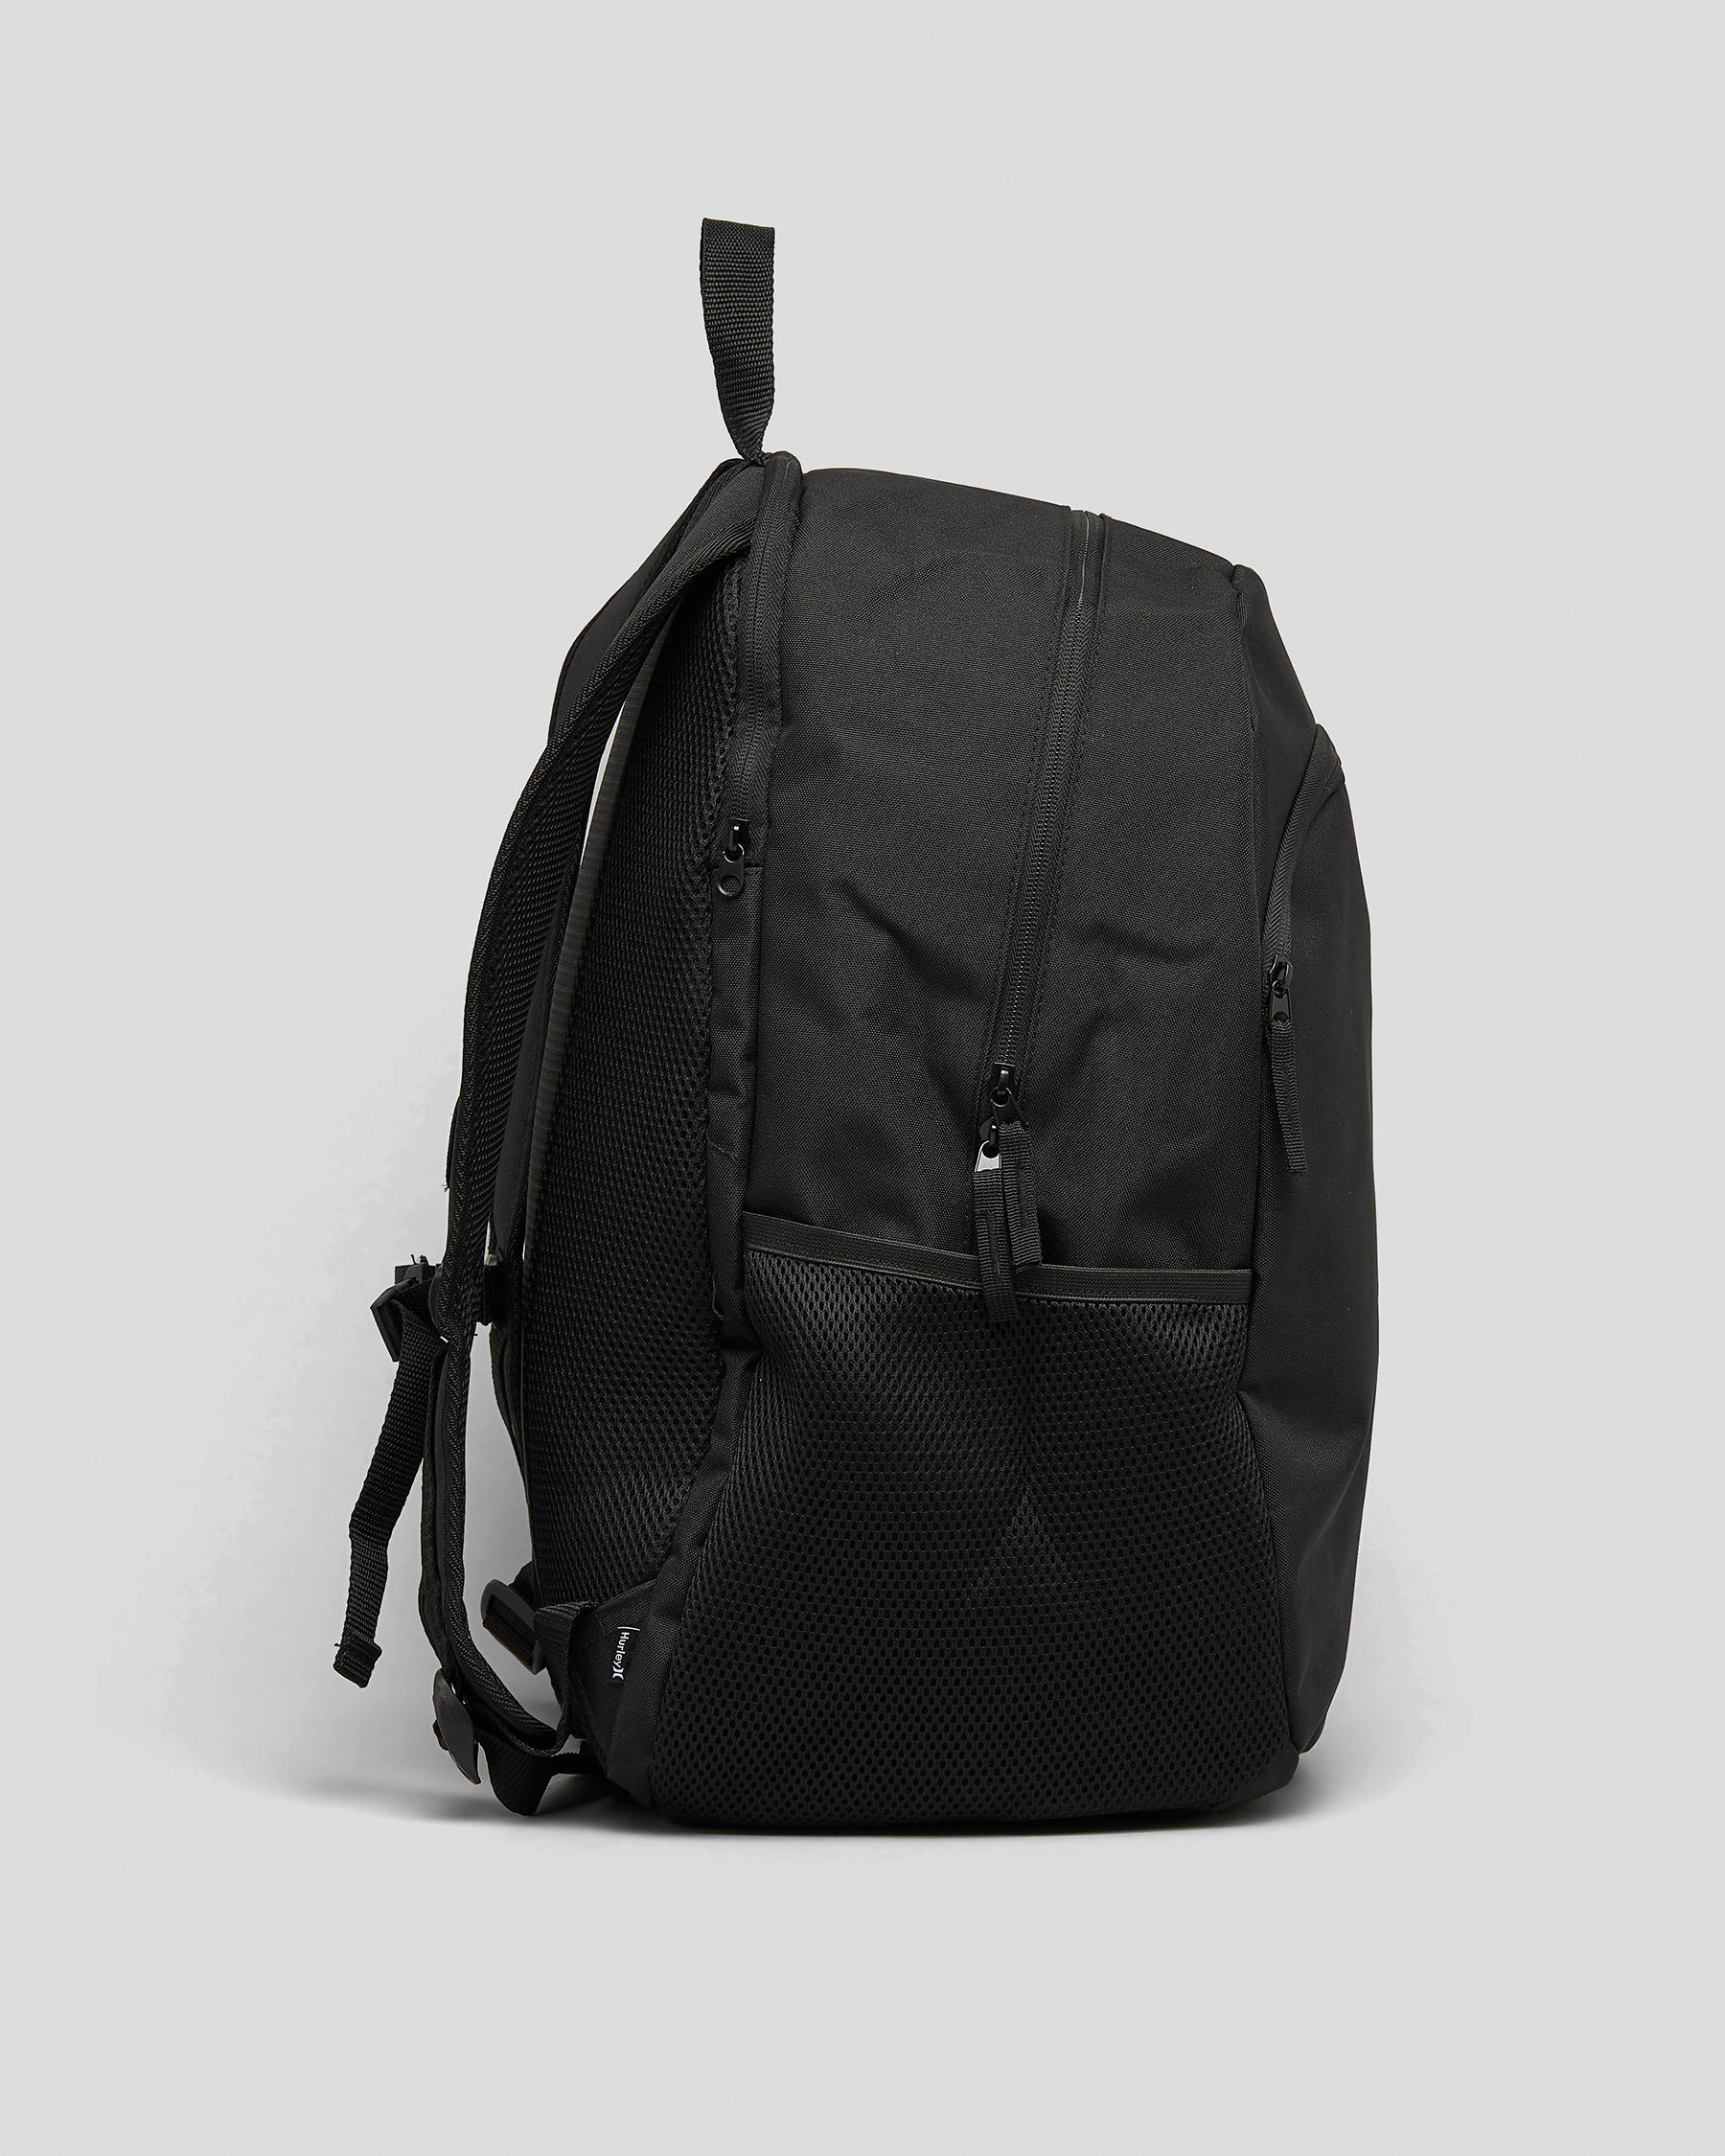 Hurley Fastlane Backpack In Black - Fast Shipping & Easy Returns - City  Beach United States